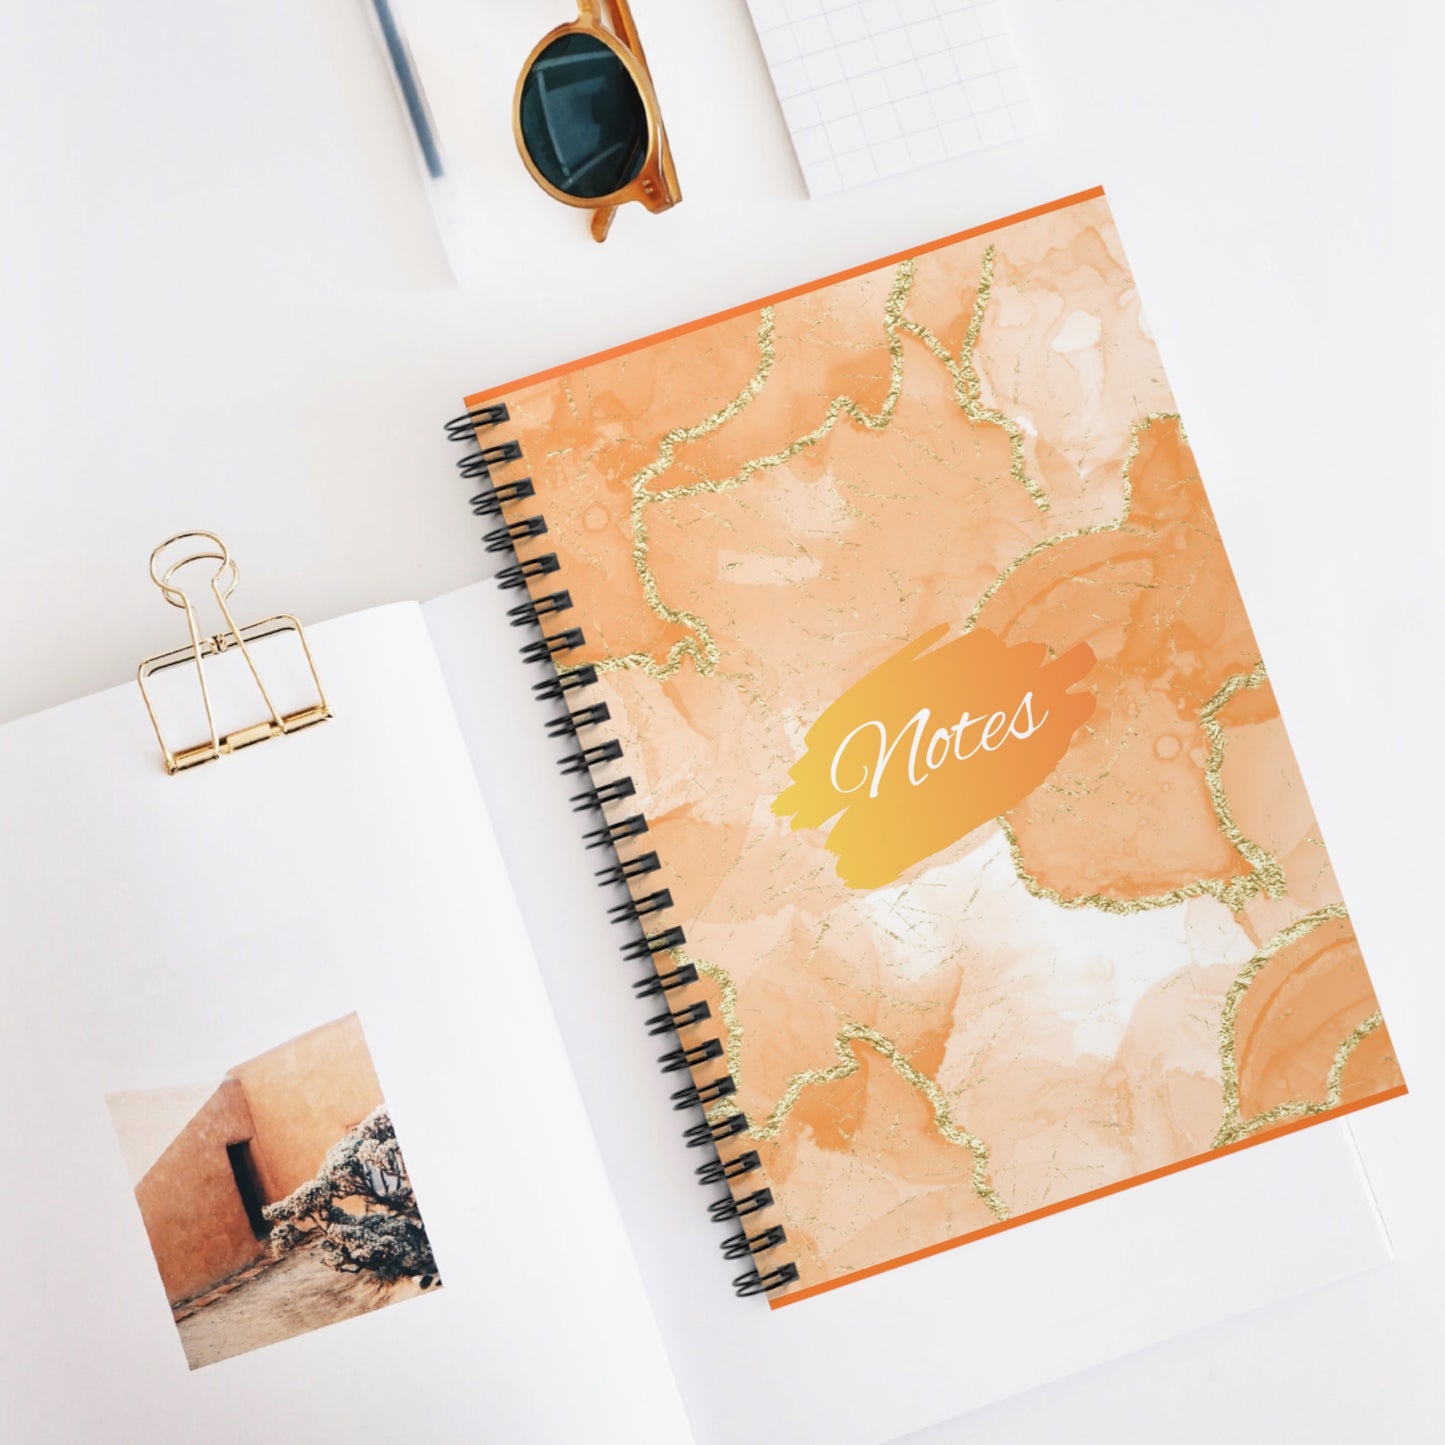 Orange Marble Spiral Notebook - College Ruled Lines 6"x 8"